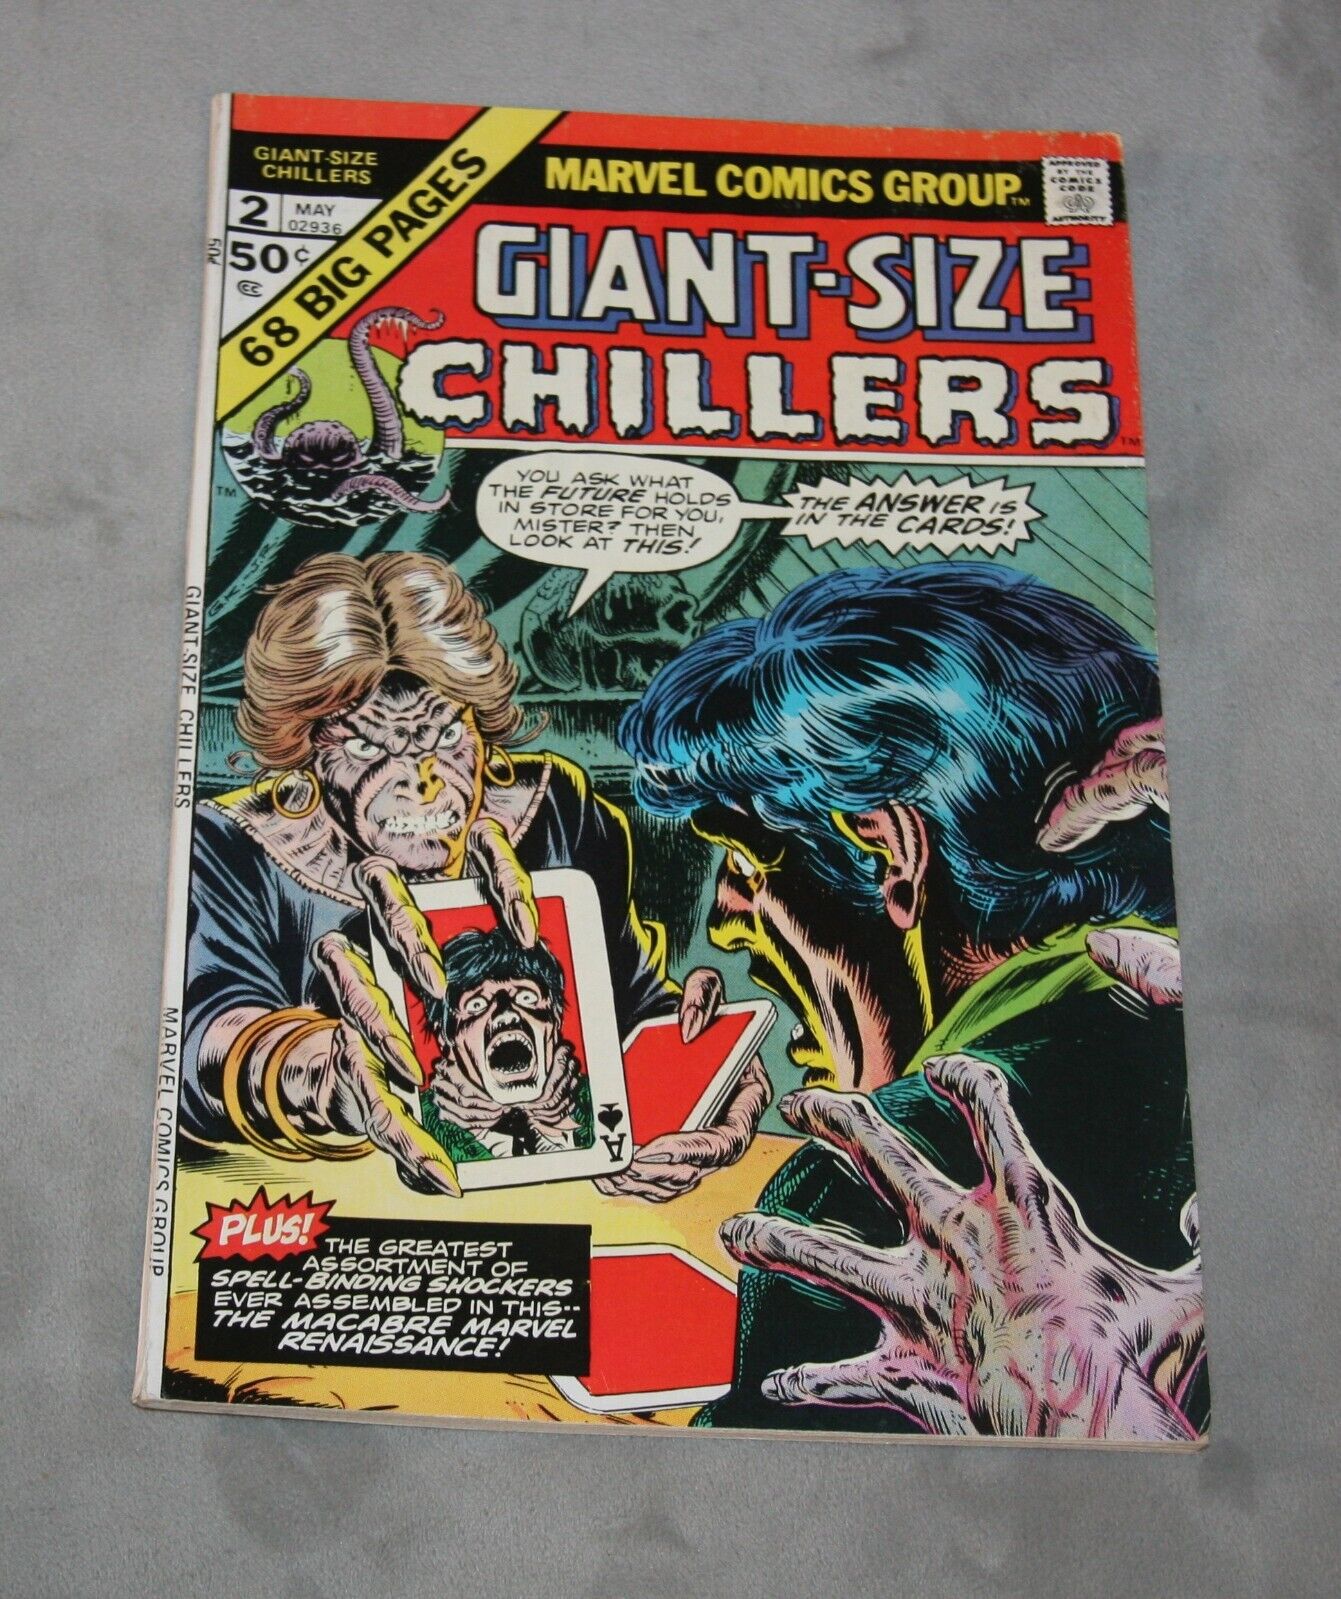 Marvel Comics Group Giant Size Chillers 1975 #2 Bronze Age Fine/VF Condition